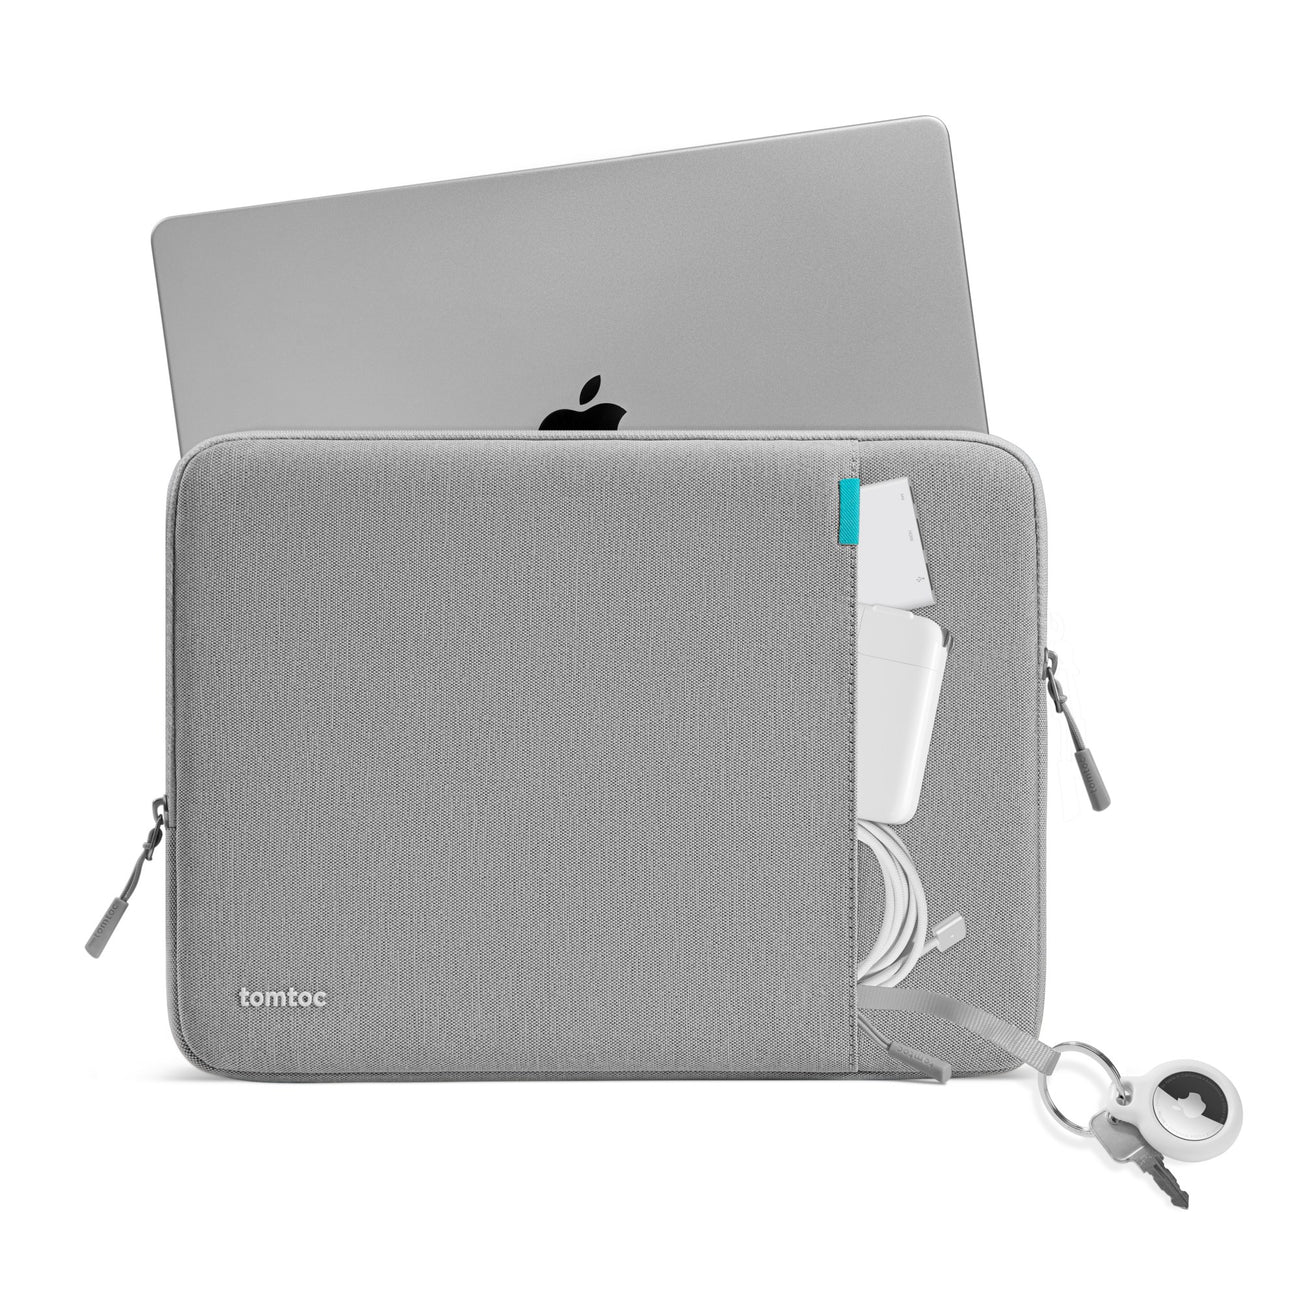 tomtoc Protective Sleeve for MacBook Air / Pro 13" - Gray